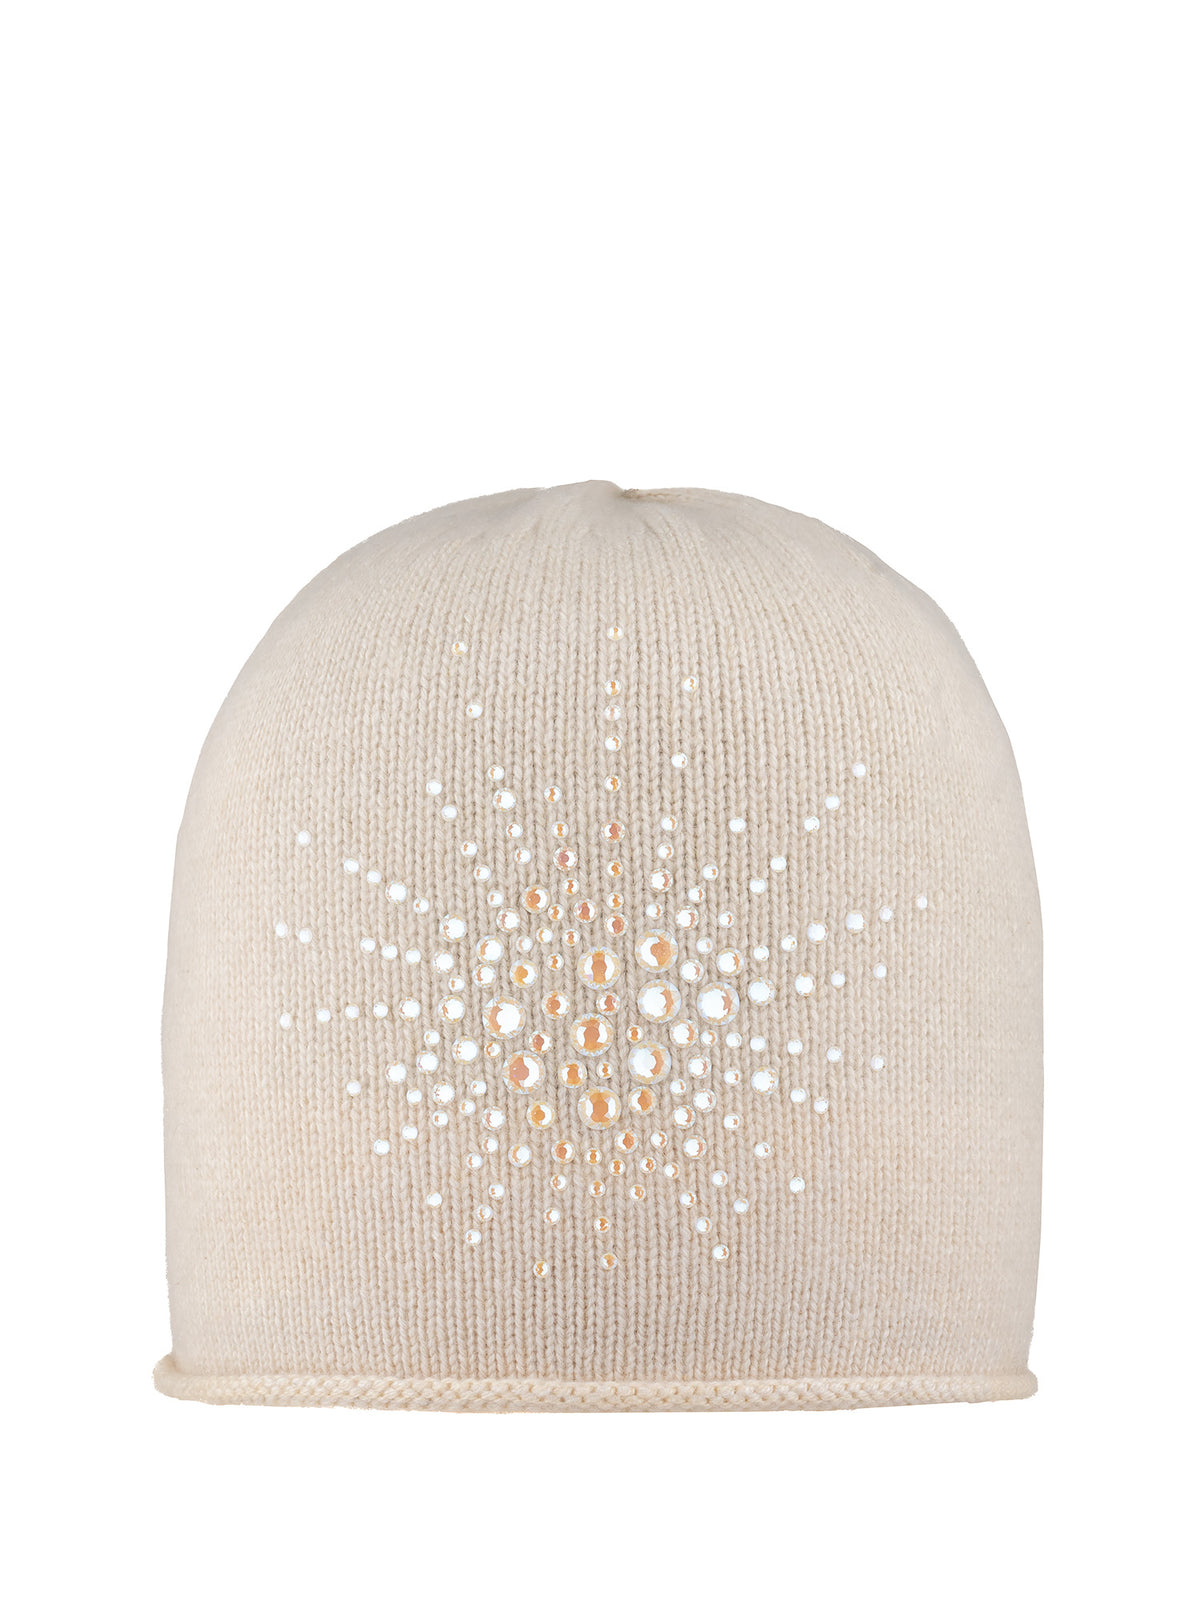 Ivory colored cashmere Sea Urchin Cloche embellished with ivory Swarovski  crystals on the front forming a sea urchin pattern.